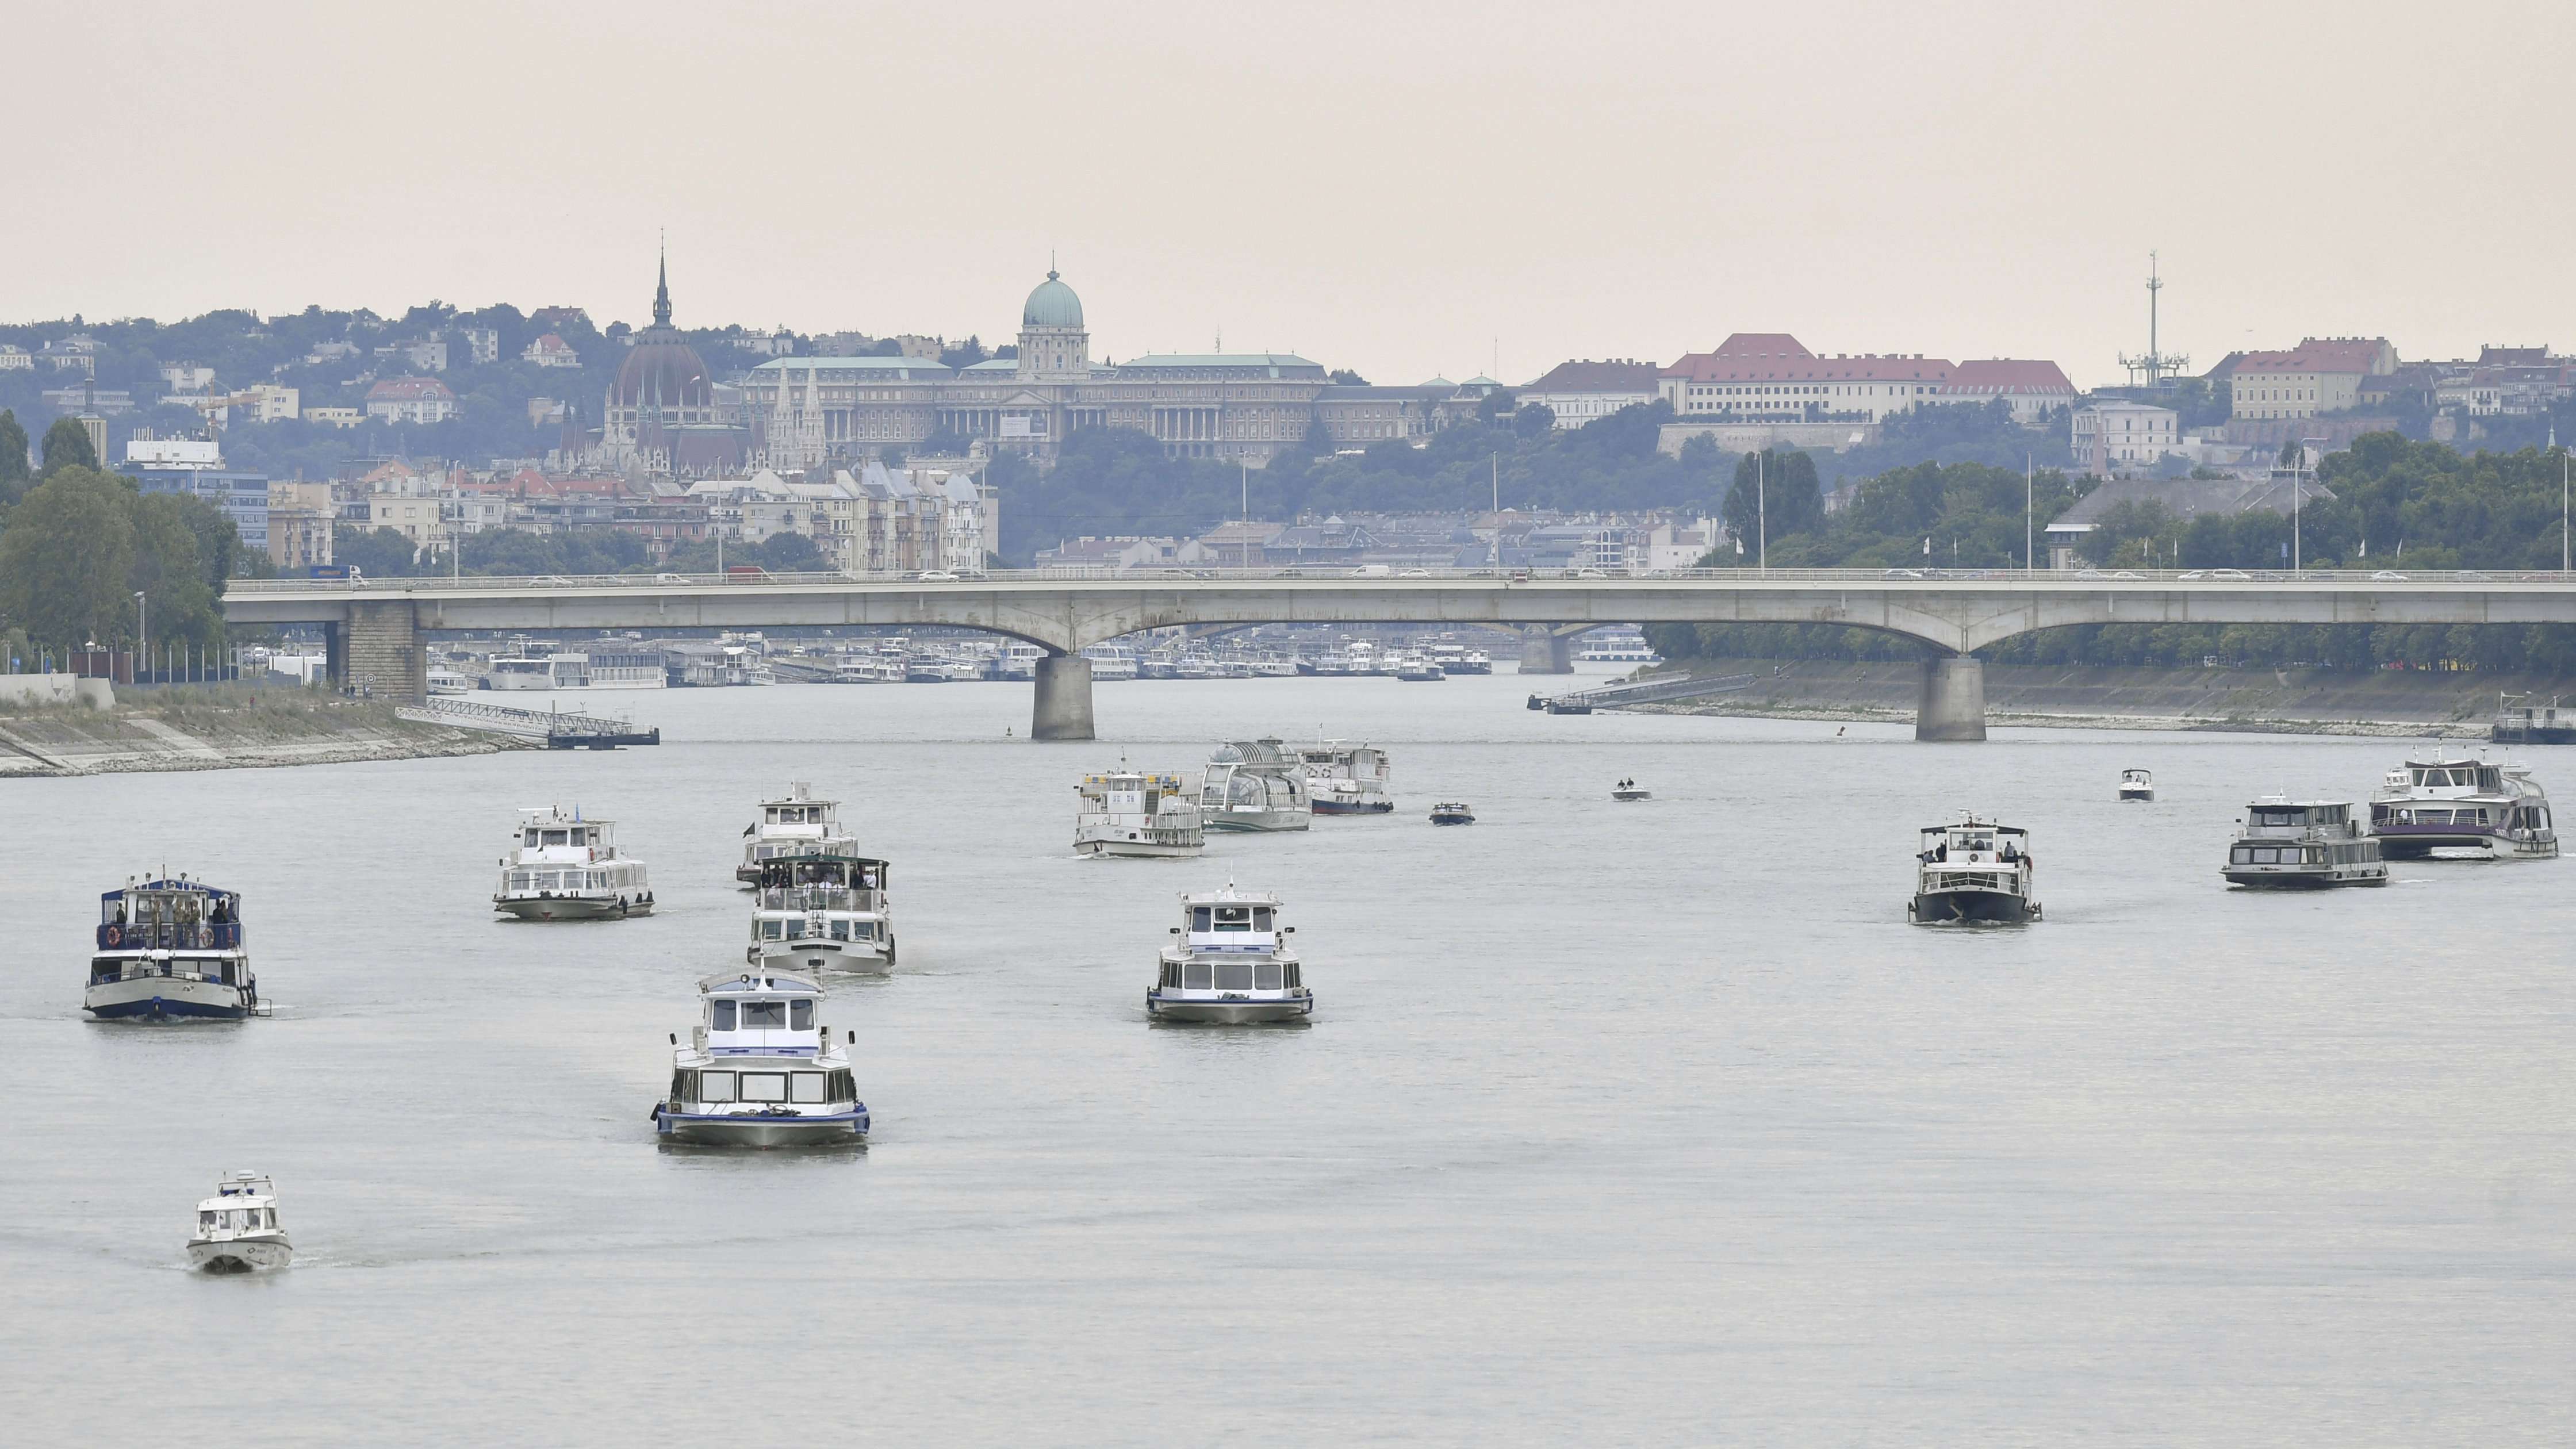 Ship collision in Budapest - Memorial event held on Danube River